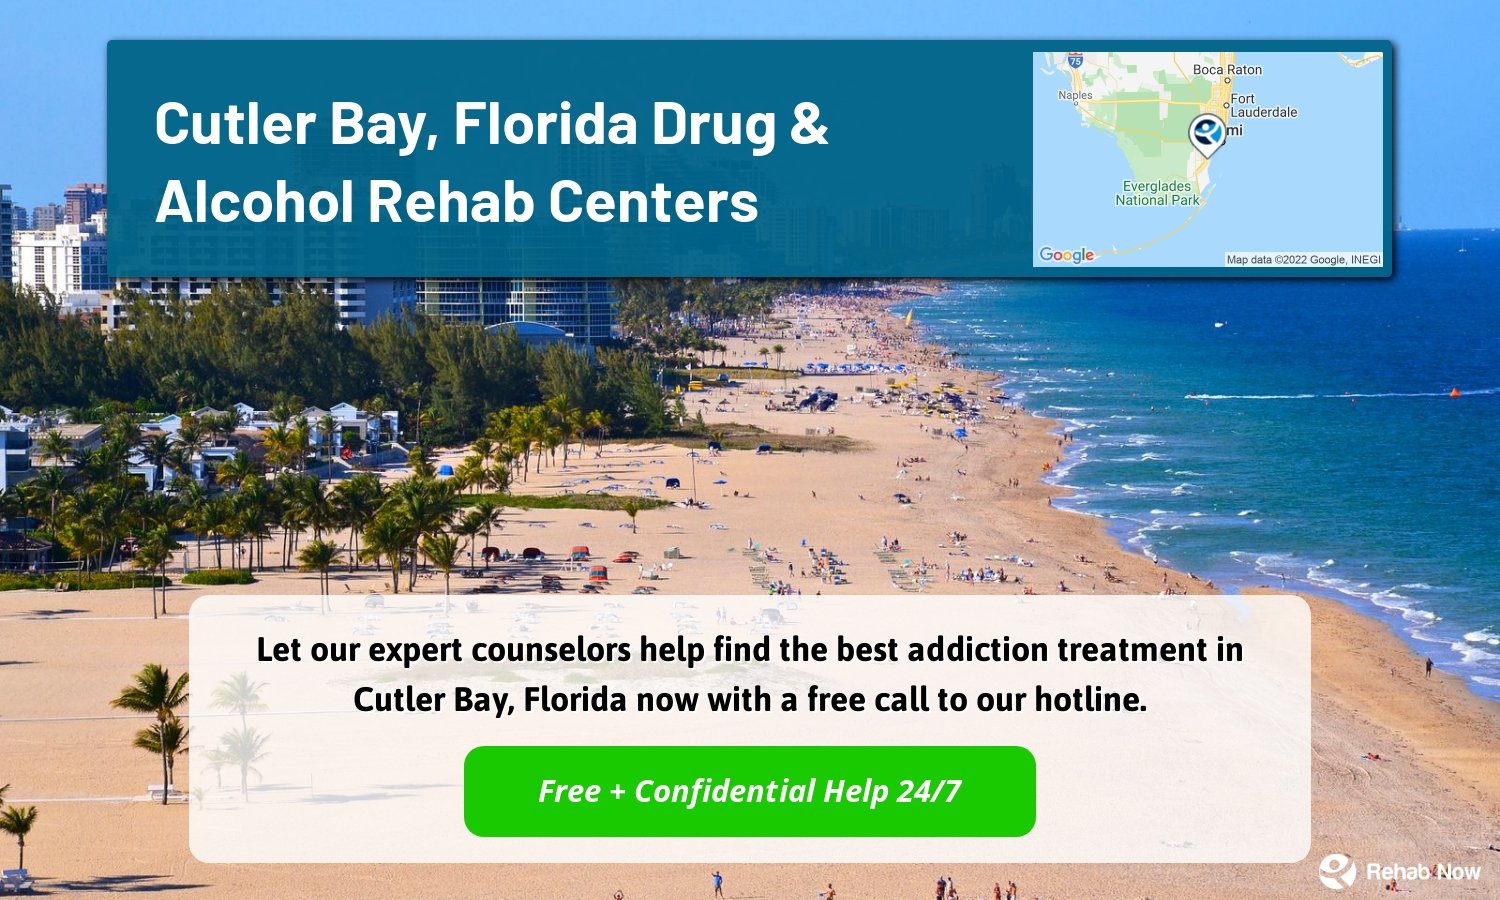 Let our expert counselors help find the best addiction treatment in Cutler Bay, Florida now with a free call to our hotline.